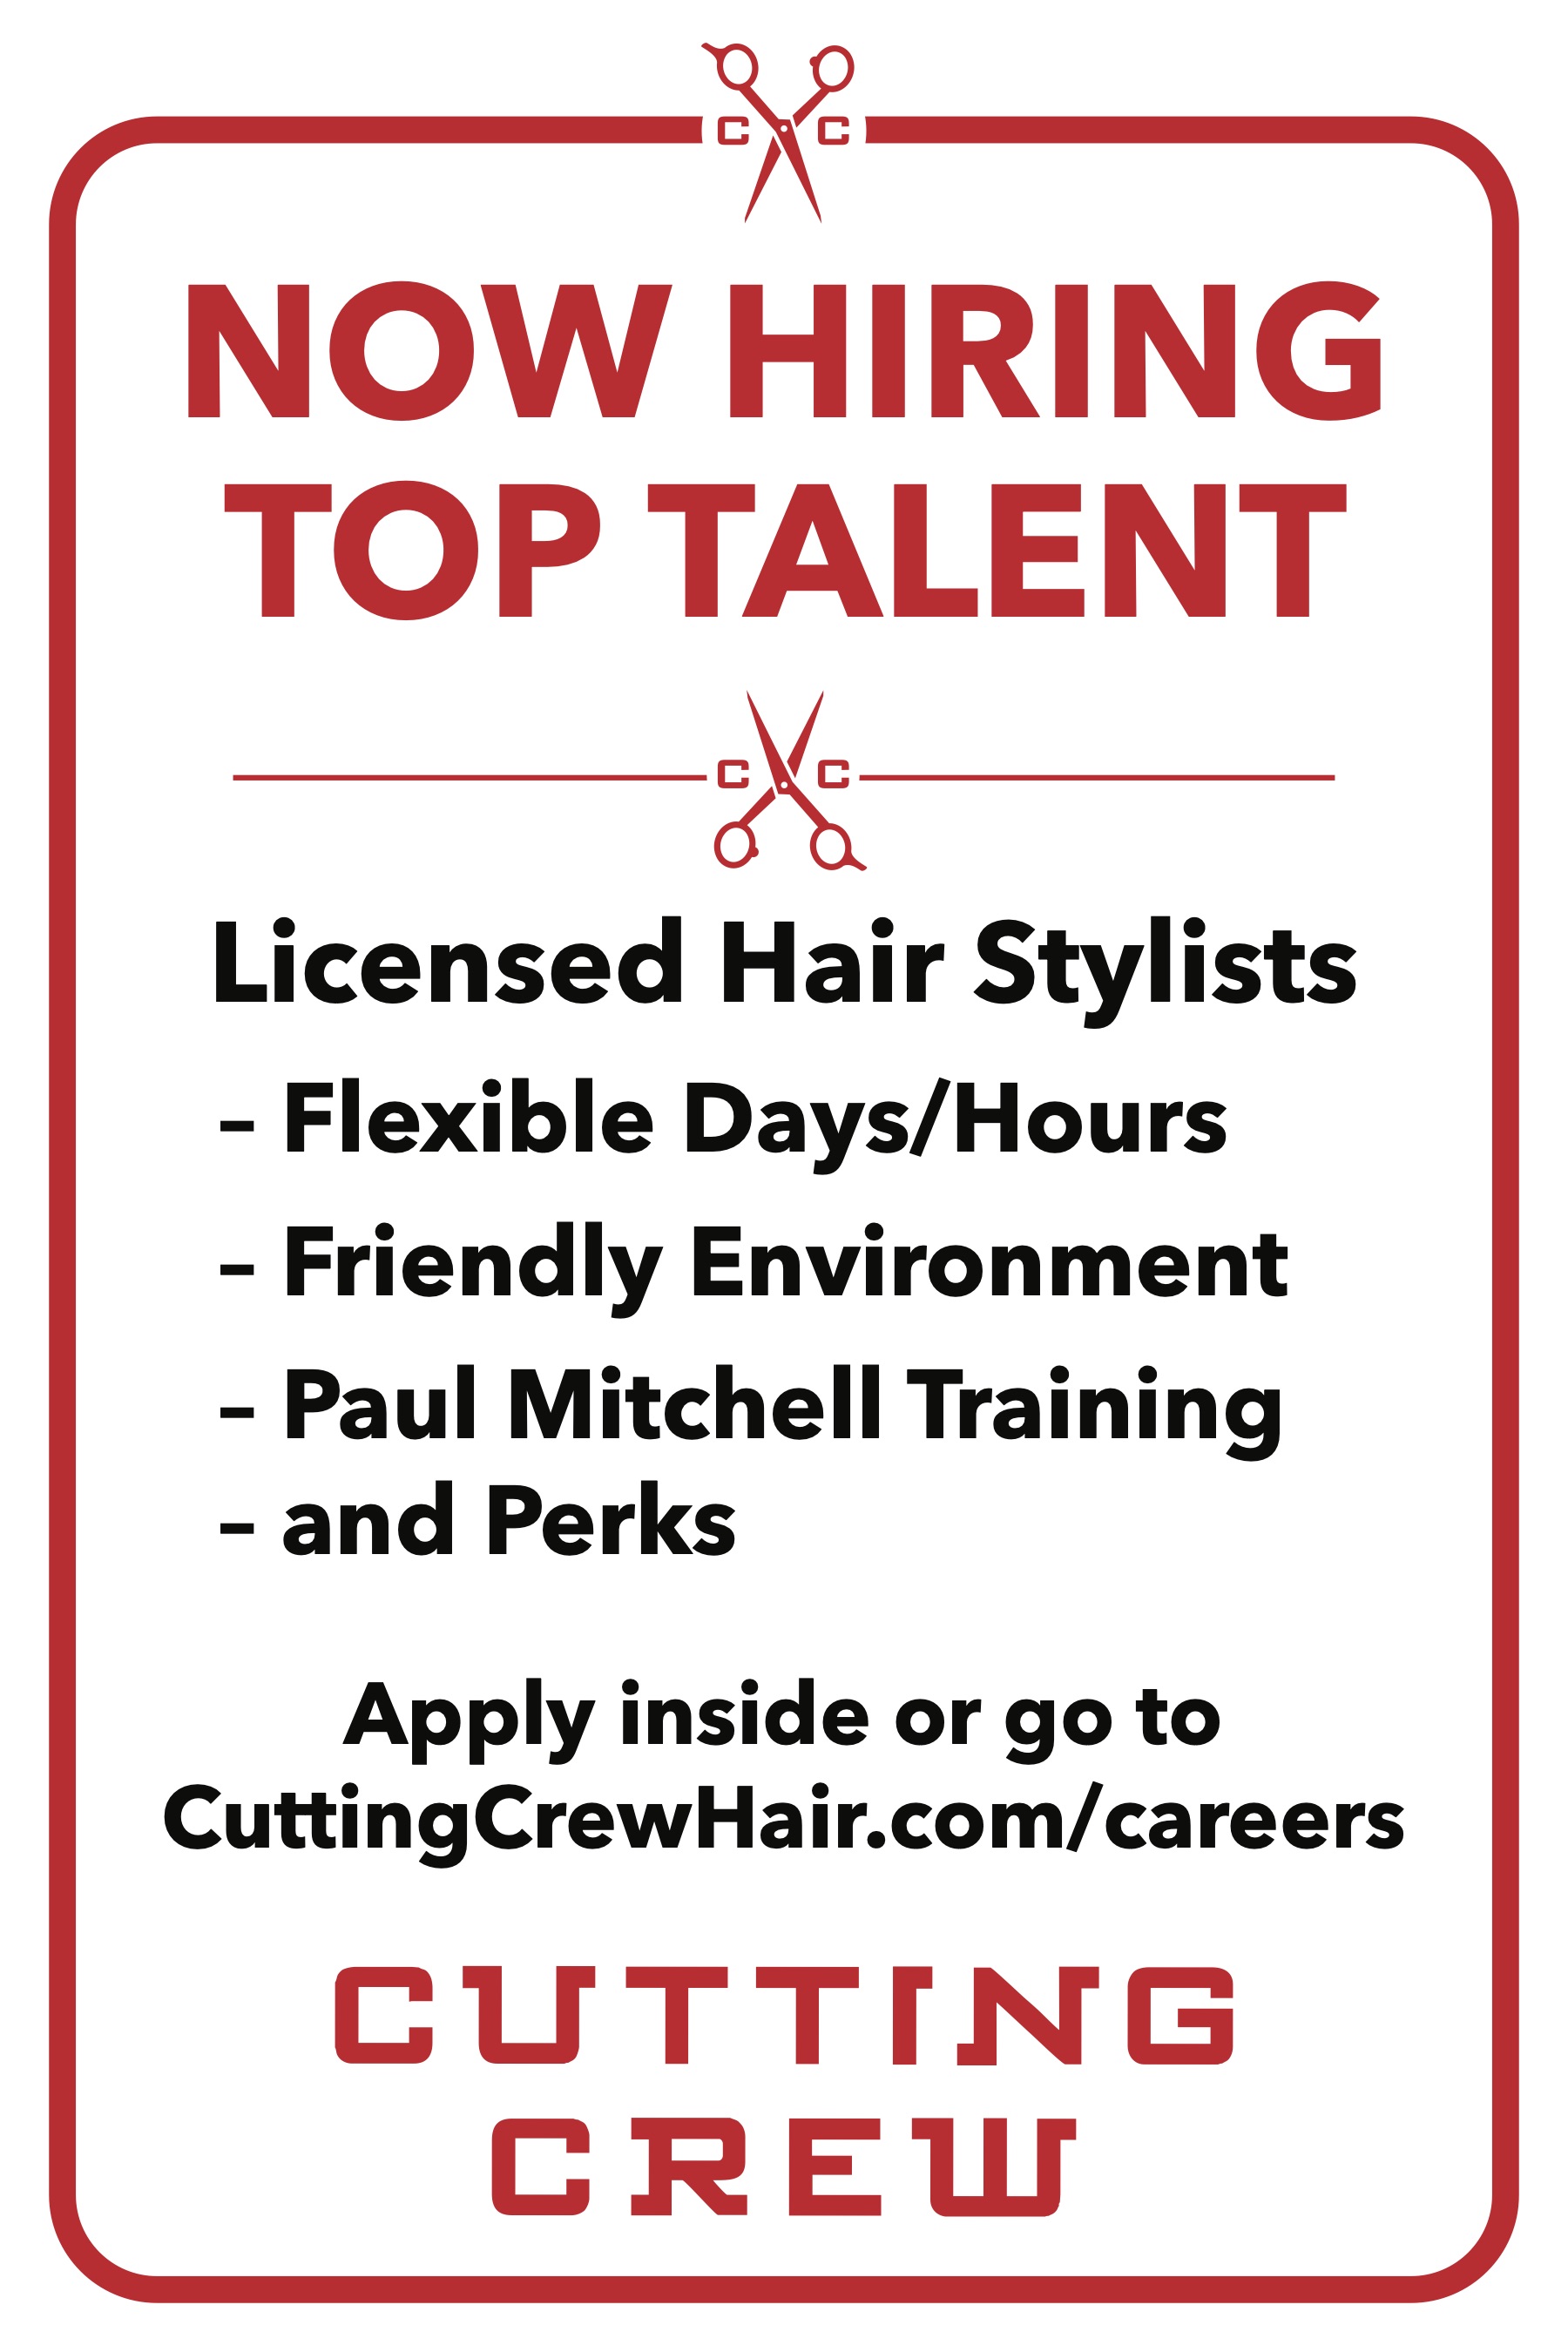 Jump start your career today with the Cutting Crew Hair Salon team with our current employment opportunities.